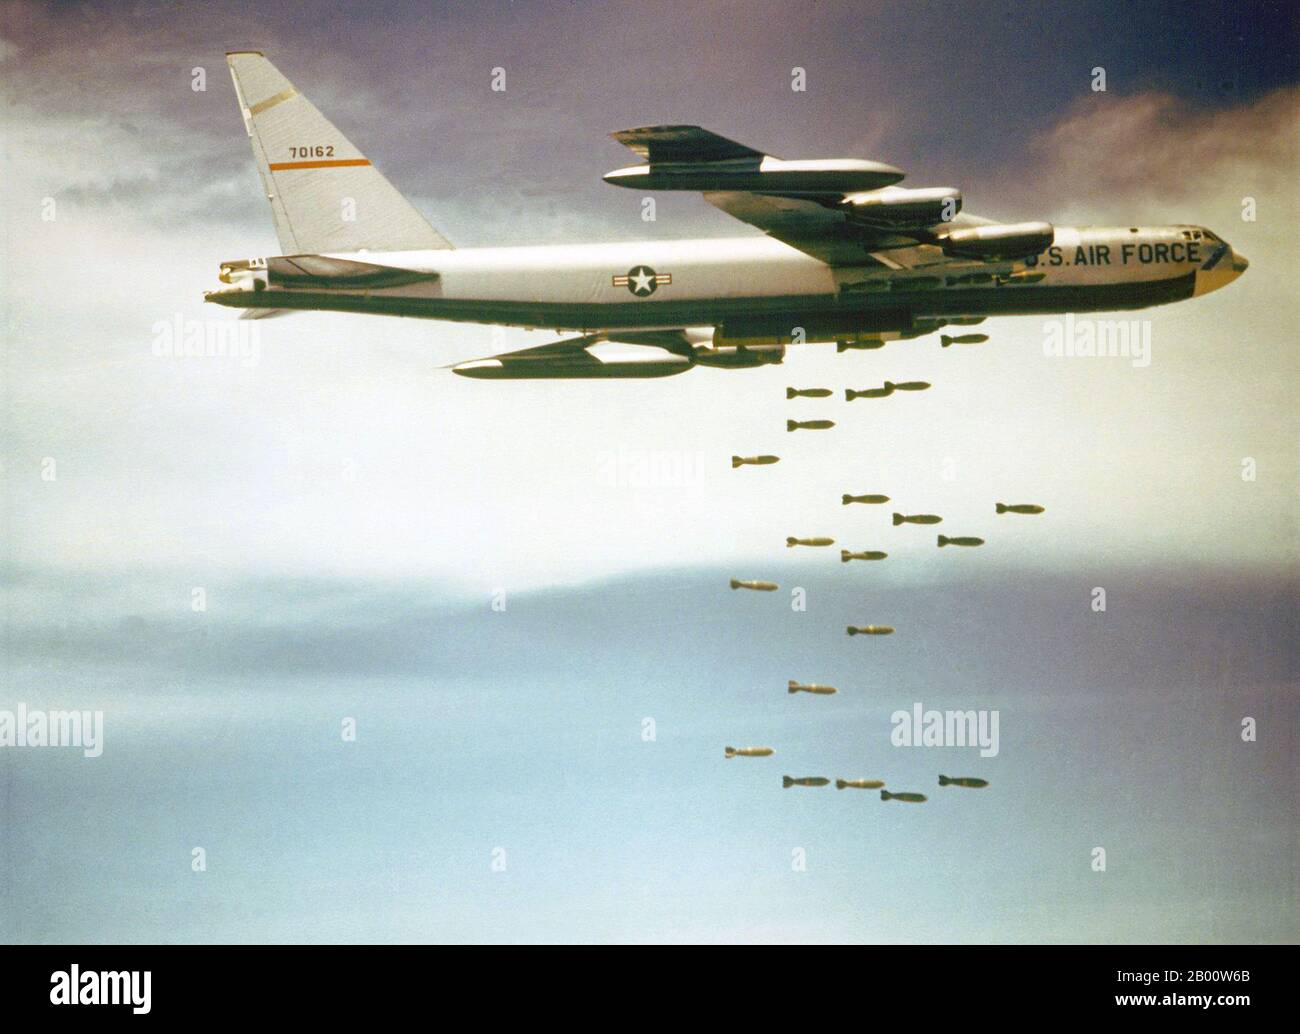 vietnam-american-b-52f-bombers-of-usaf-strategic-air-command-unleashing-its-bomb-load-over-vietnam-1960s-american-b52-bombers-of-usaf-strategic-air-command-unleashing-its-bomb-load-over-vietnam-b52s-flying-out-of-guam-and-thailand-were-used-in-arclight-operations-across-south-vietnam-and-in-operations-against-the-north-such-as-linebacker-1-and-linebacker-2-they-caused-immense-damage-and-loss-of-life-2B00W6B.jpg